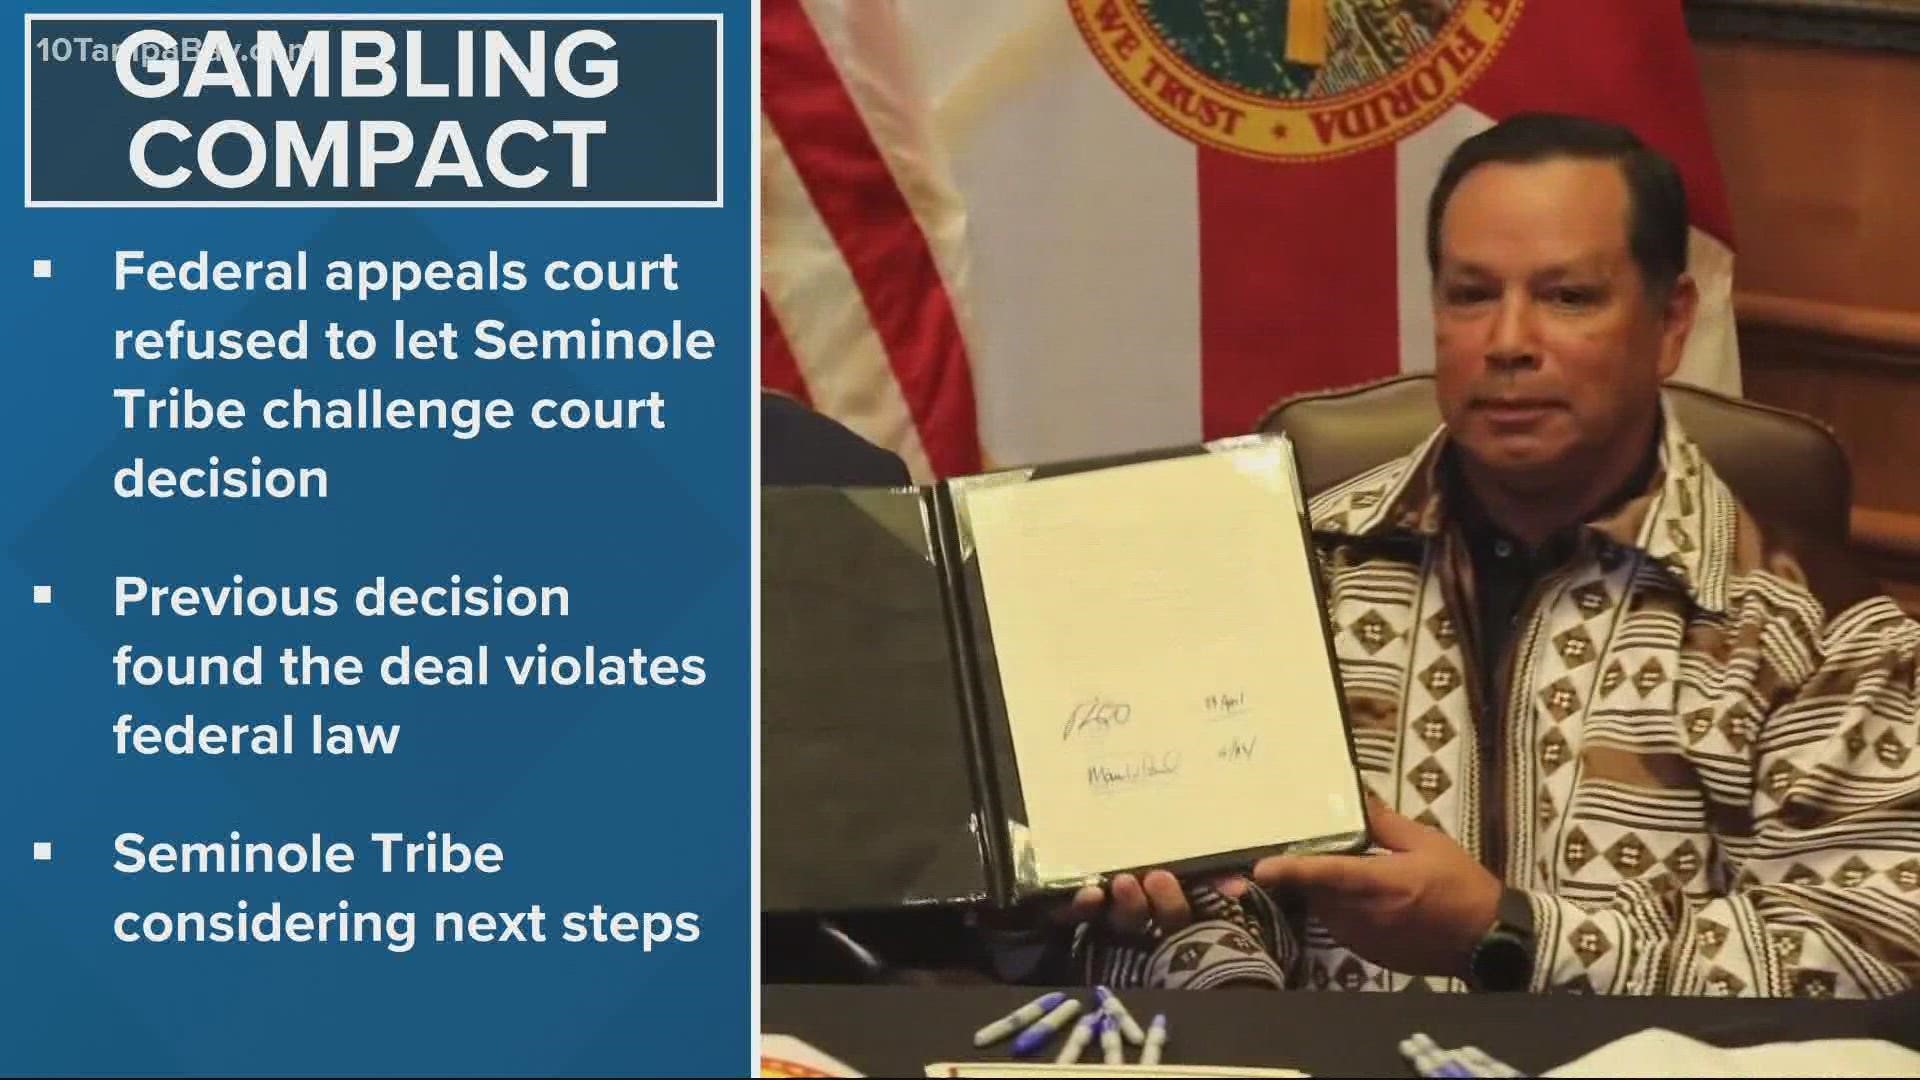 The Seminole Tribe of Florida is currently appealing a federal judge's decision that temporarily puts an end to sports betting in the state.